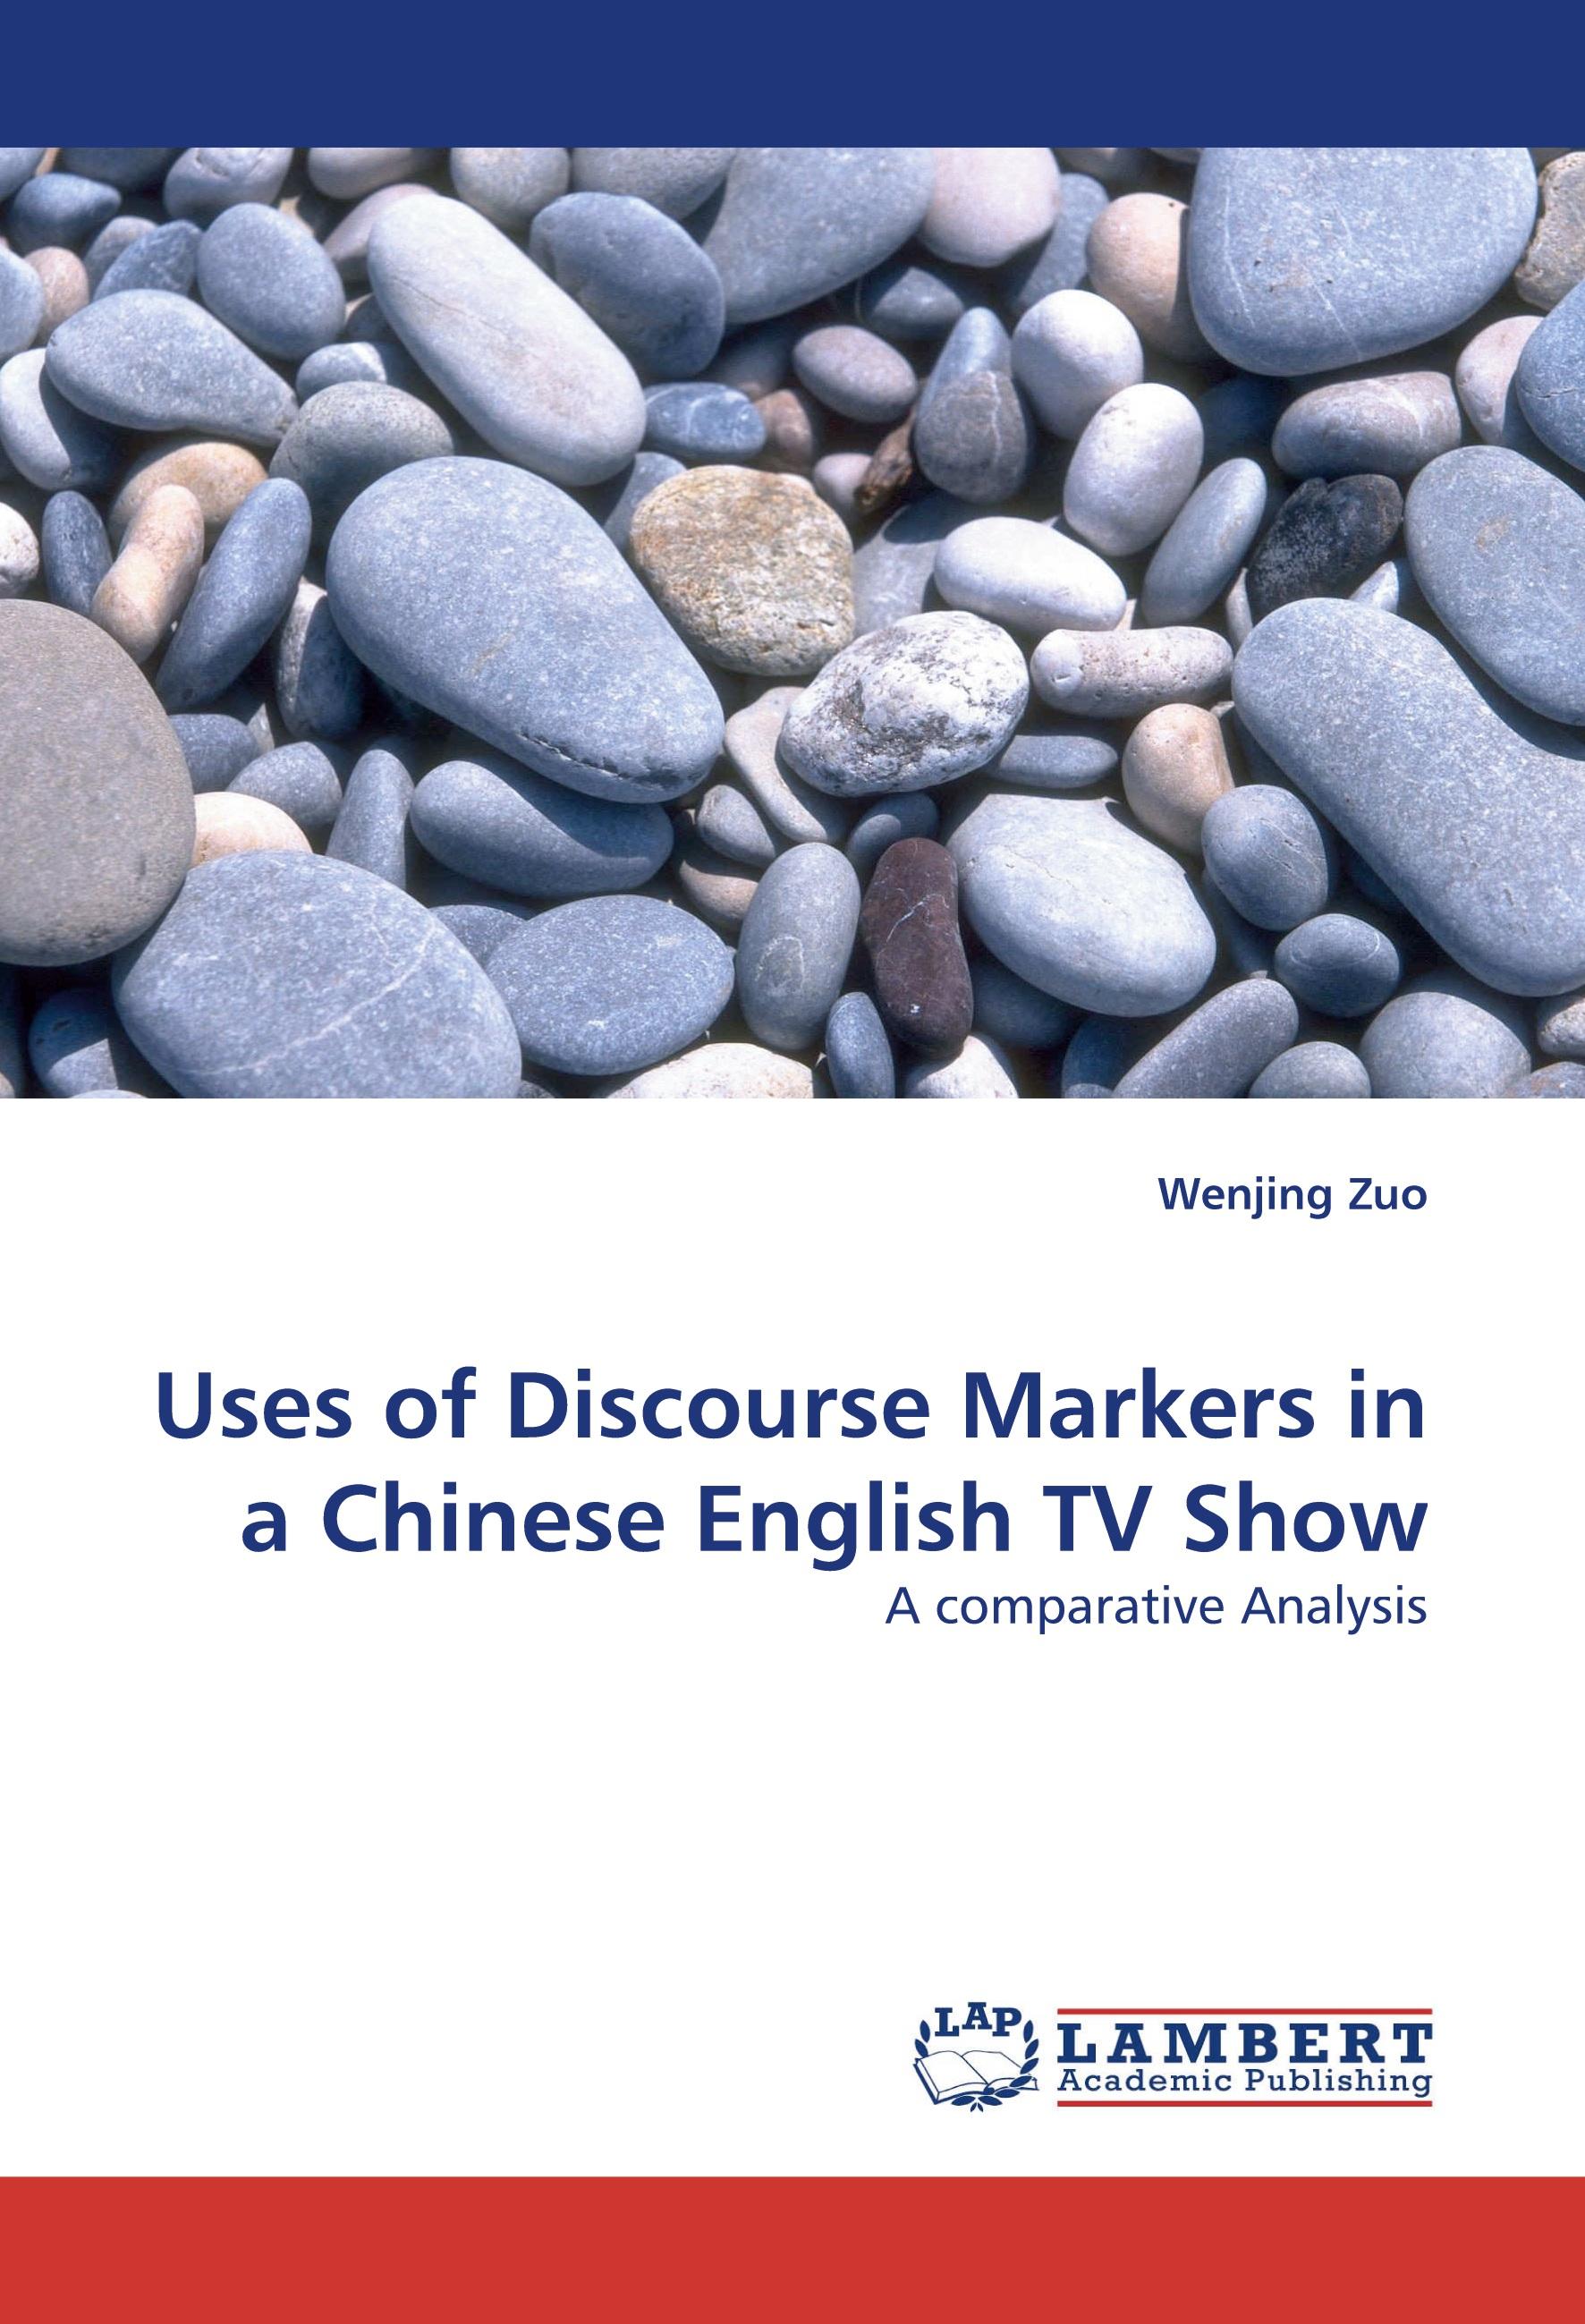 Uses of Discourse Markers in a Chinese English TV Show - Wenjing Zuo